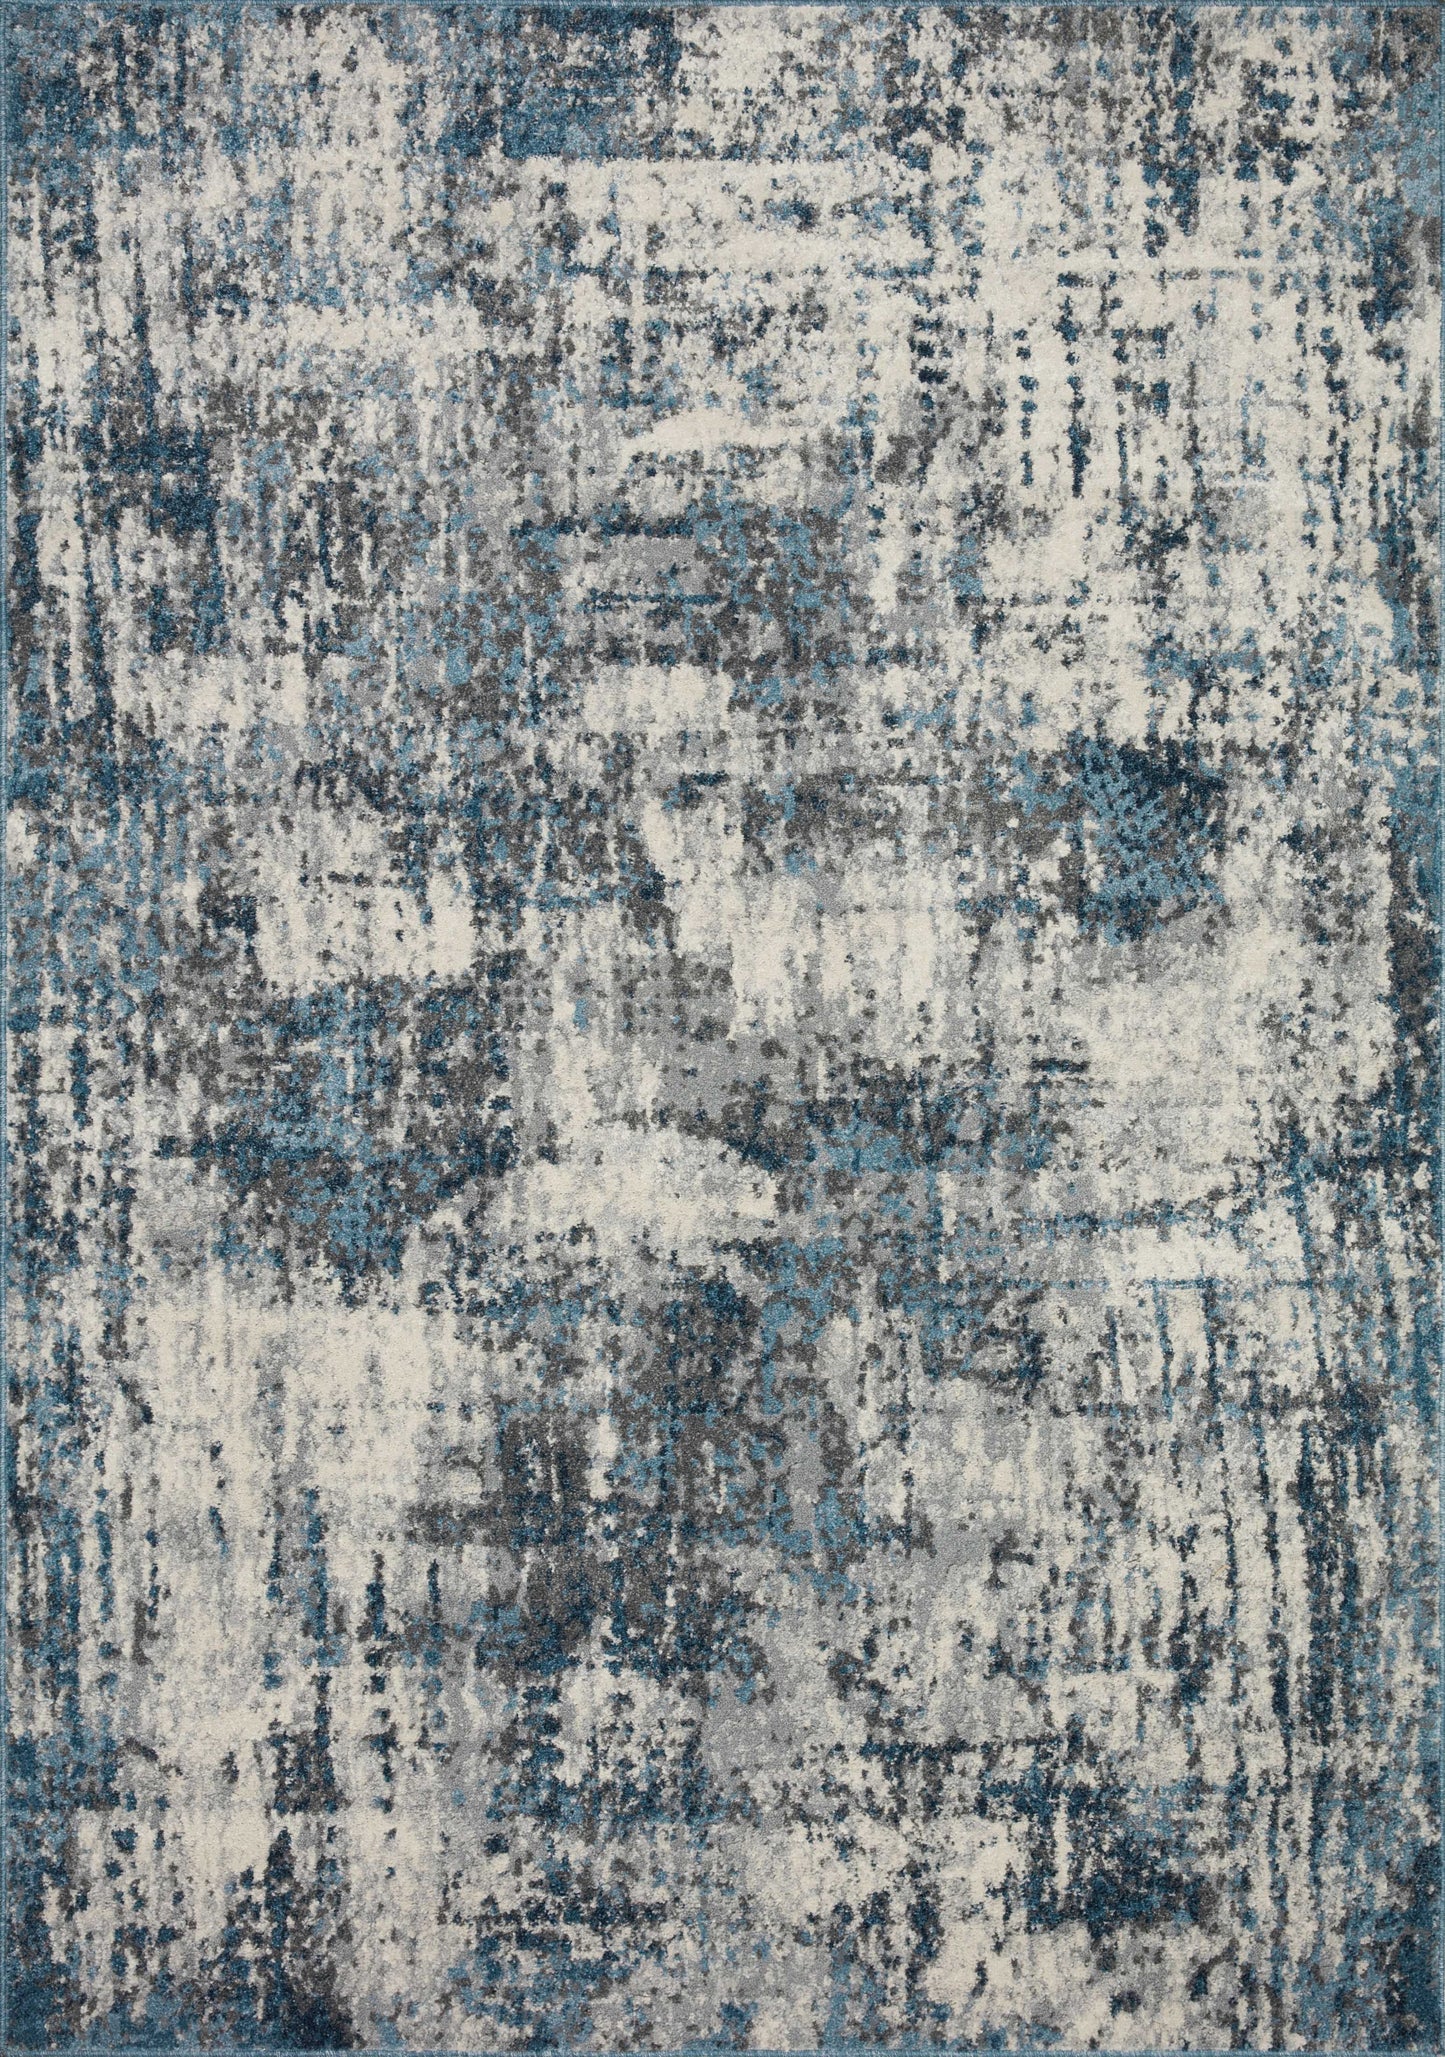 A picture of Loloi's Austen rug, in style AUS-01, color Natural / Ocean